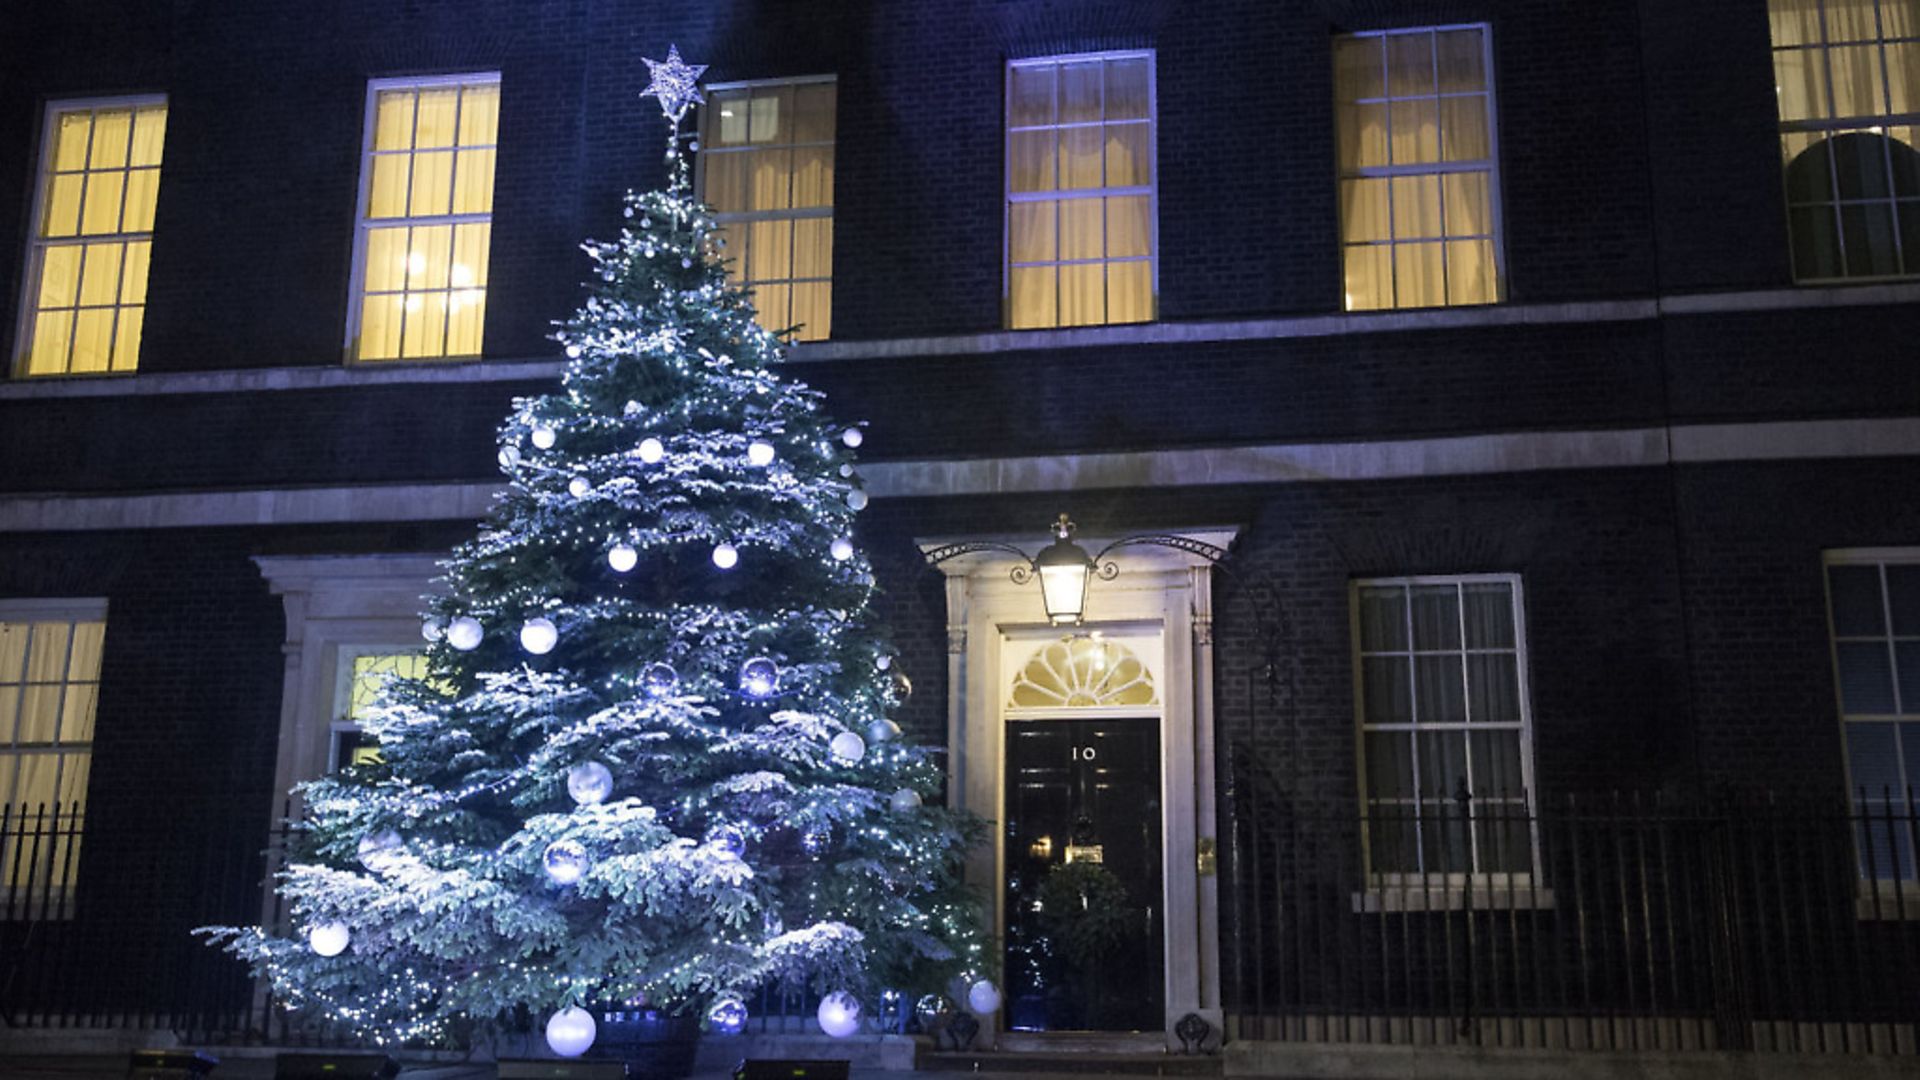 General view of the Downing Street Christmas tree lights in London. Photograph: Lauren Hurley/PA. - Credit: PA Archive/PA Images